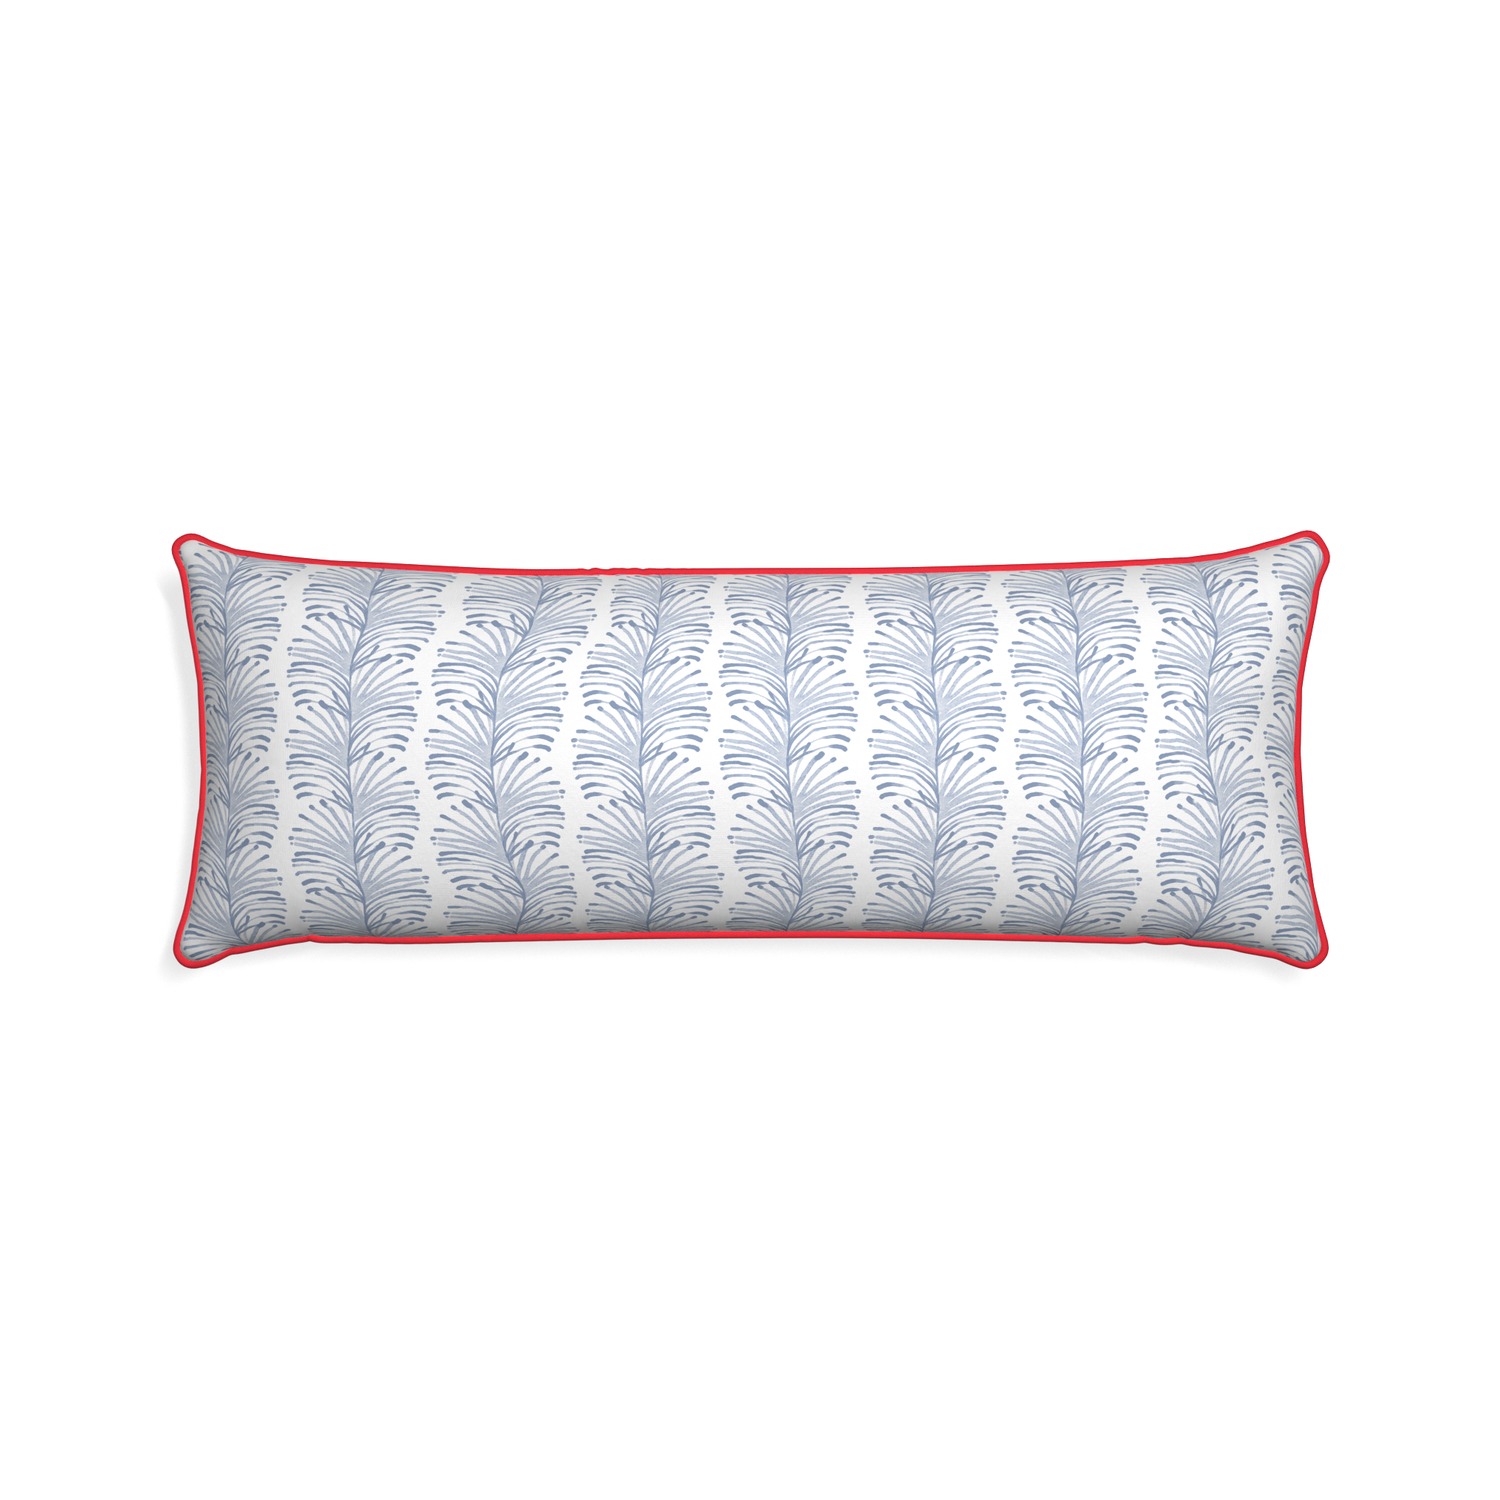 Xl-lumbar emma sky custom pillow with cherry piping on white background